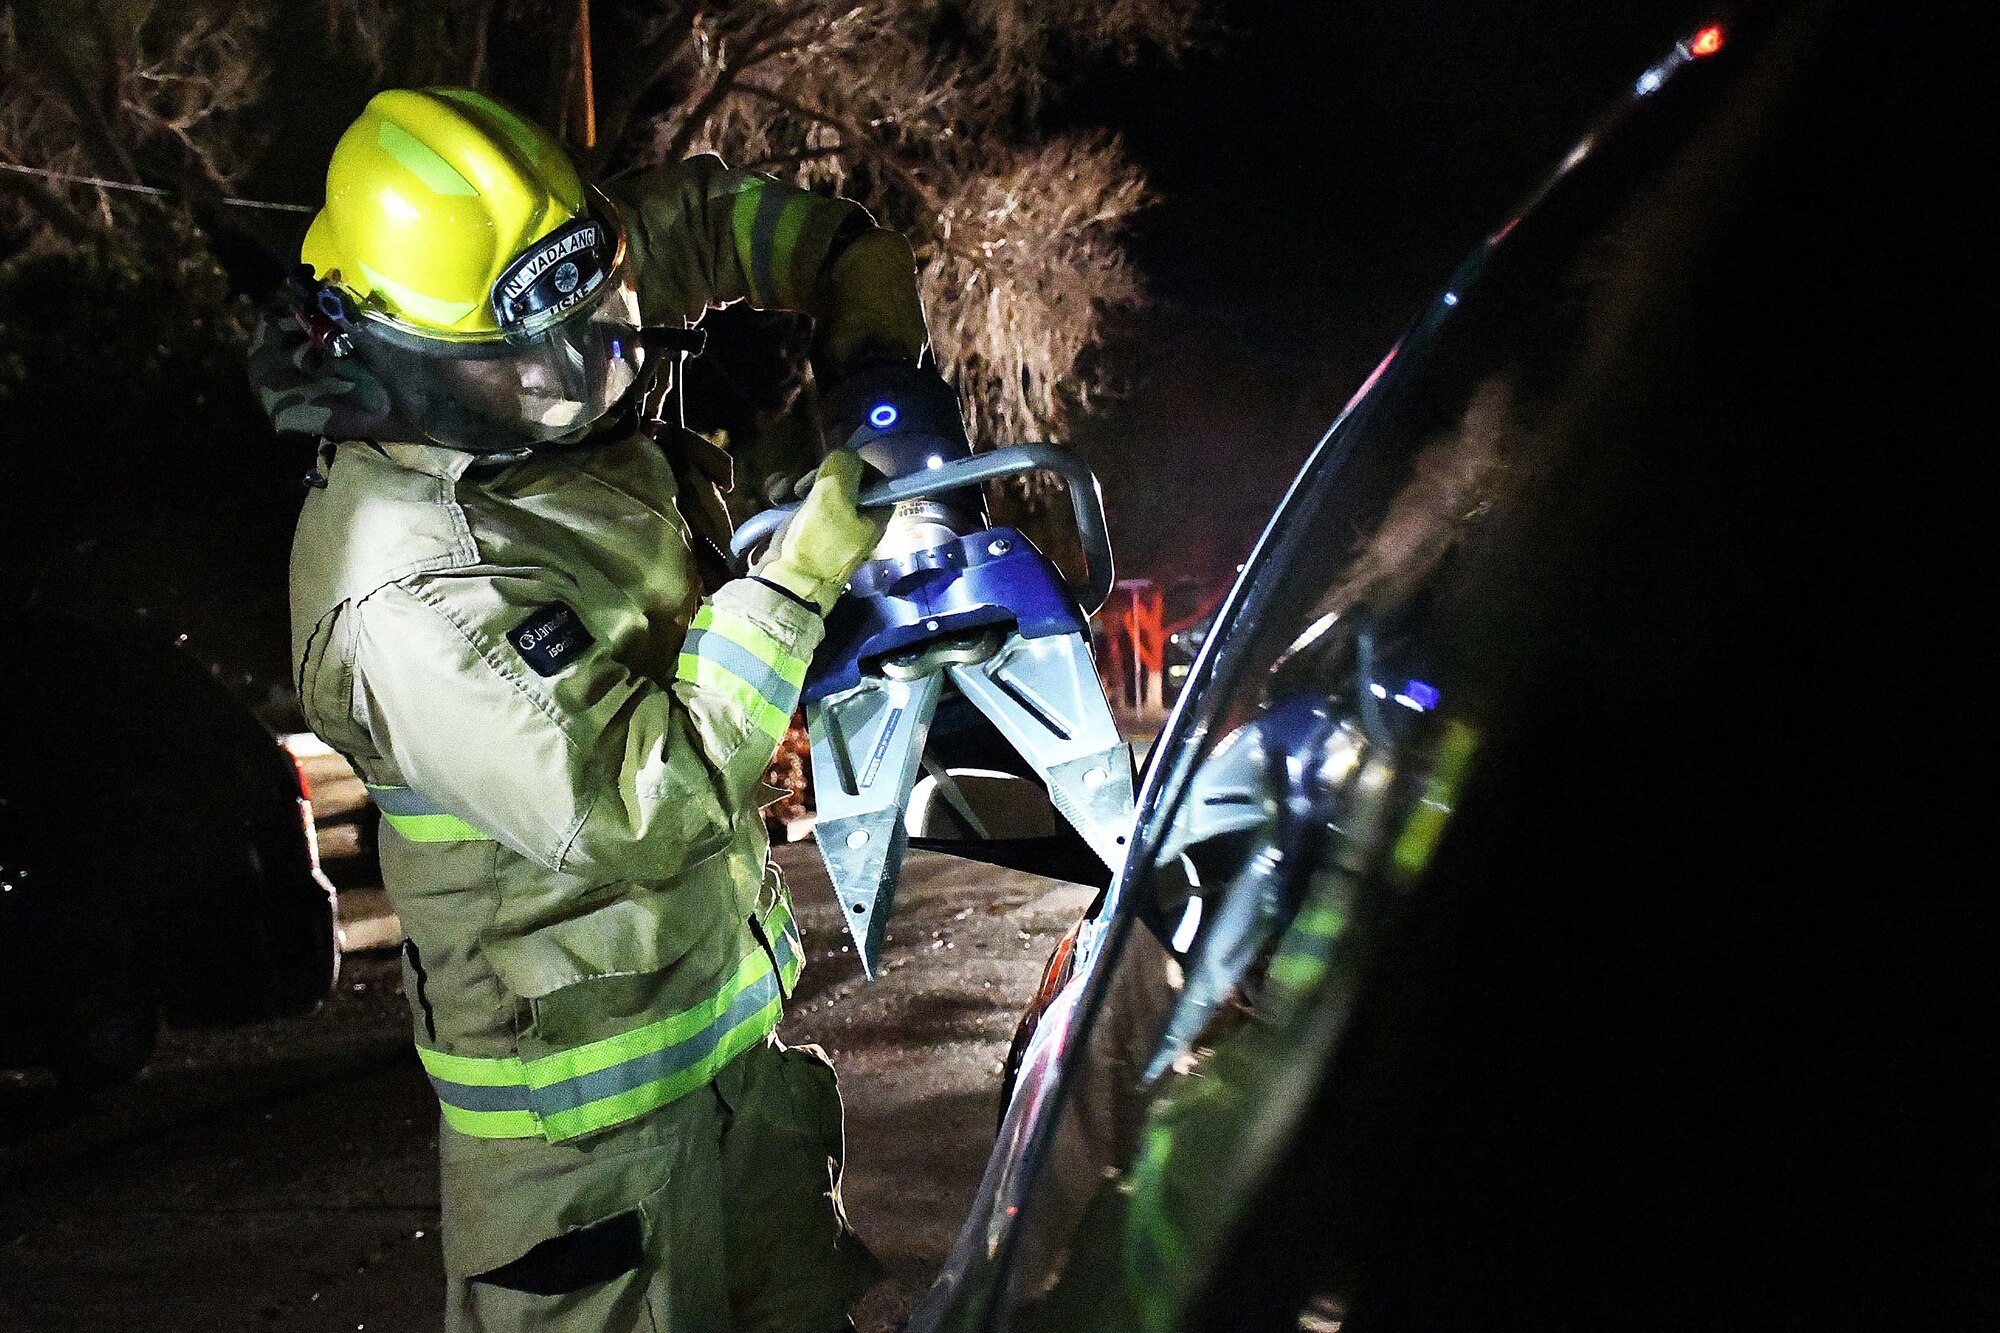 Firefighters from the 152nd Civil Engineer Squadron use the jaws of life to open a car door during Operation Chemical Blackjack Mar. 7, 2021, at the Nevada Air National Guard base in Reno. The three-day exercise was designed to ensure Airmen are ready for chemical, biological, radiological or nuclear (CBRN) threats is presented.